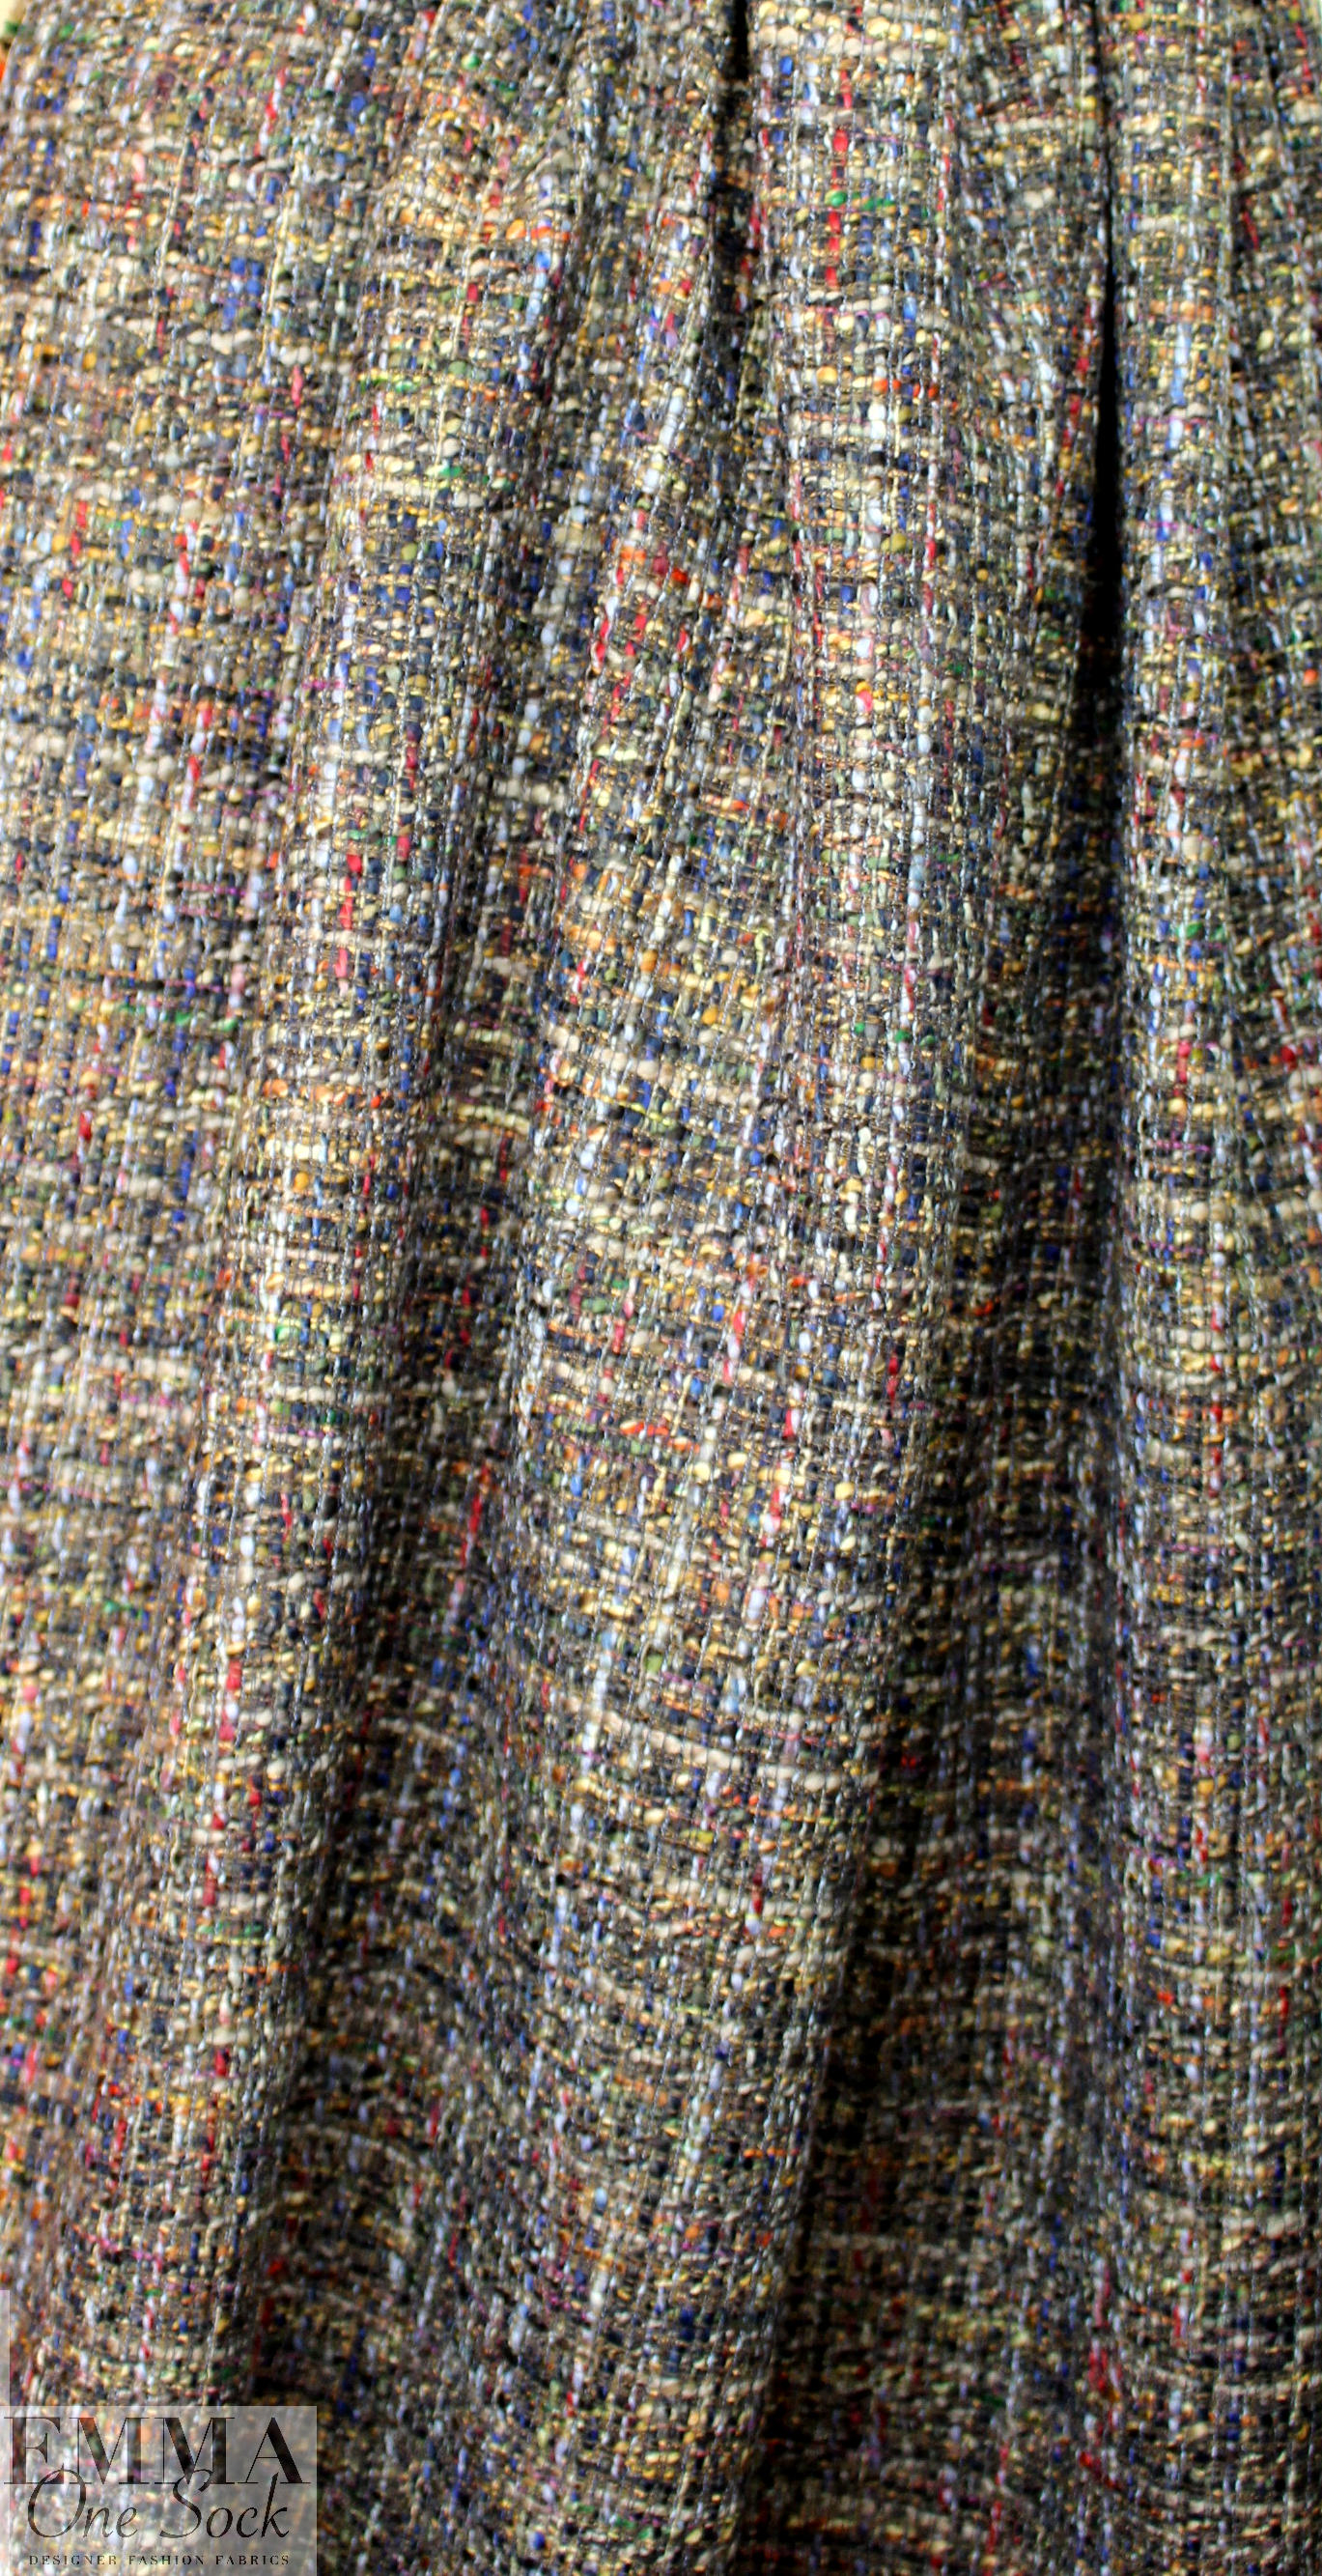 Italian 'Chanel tweed' cotton boucle' - taupe/black from